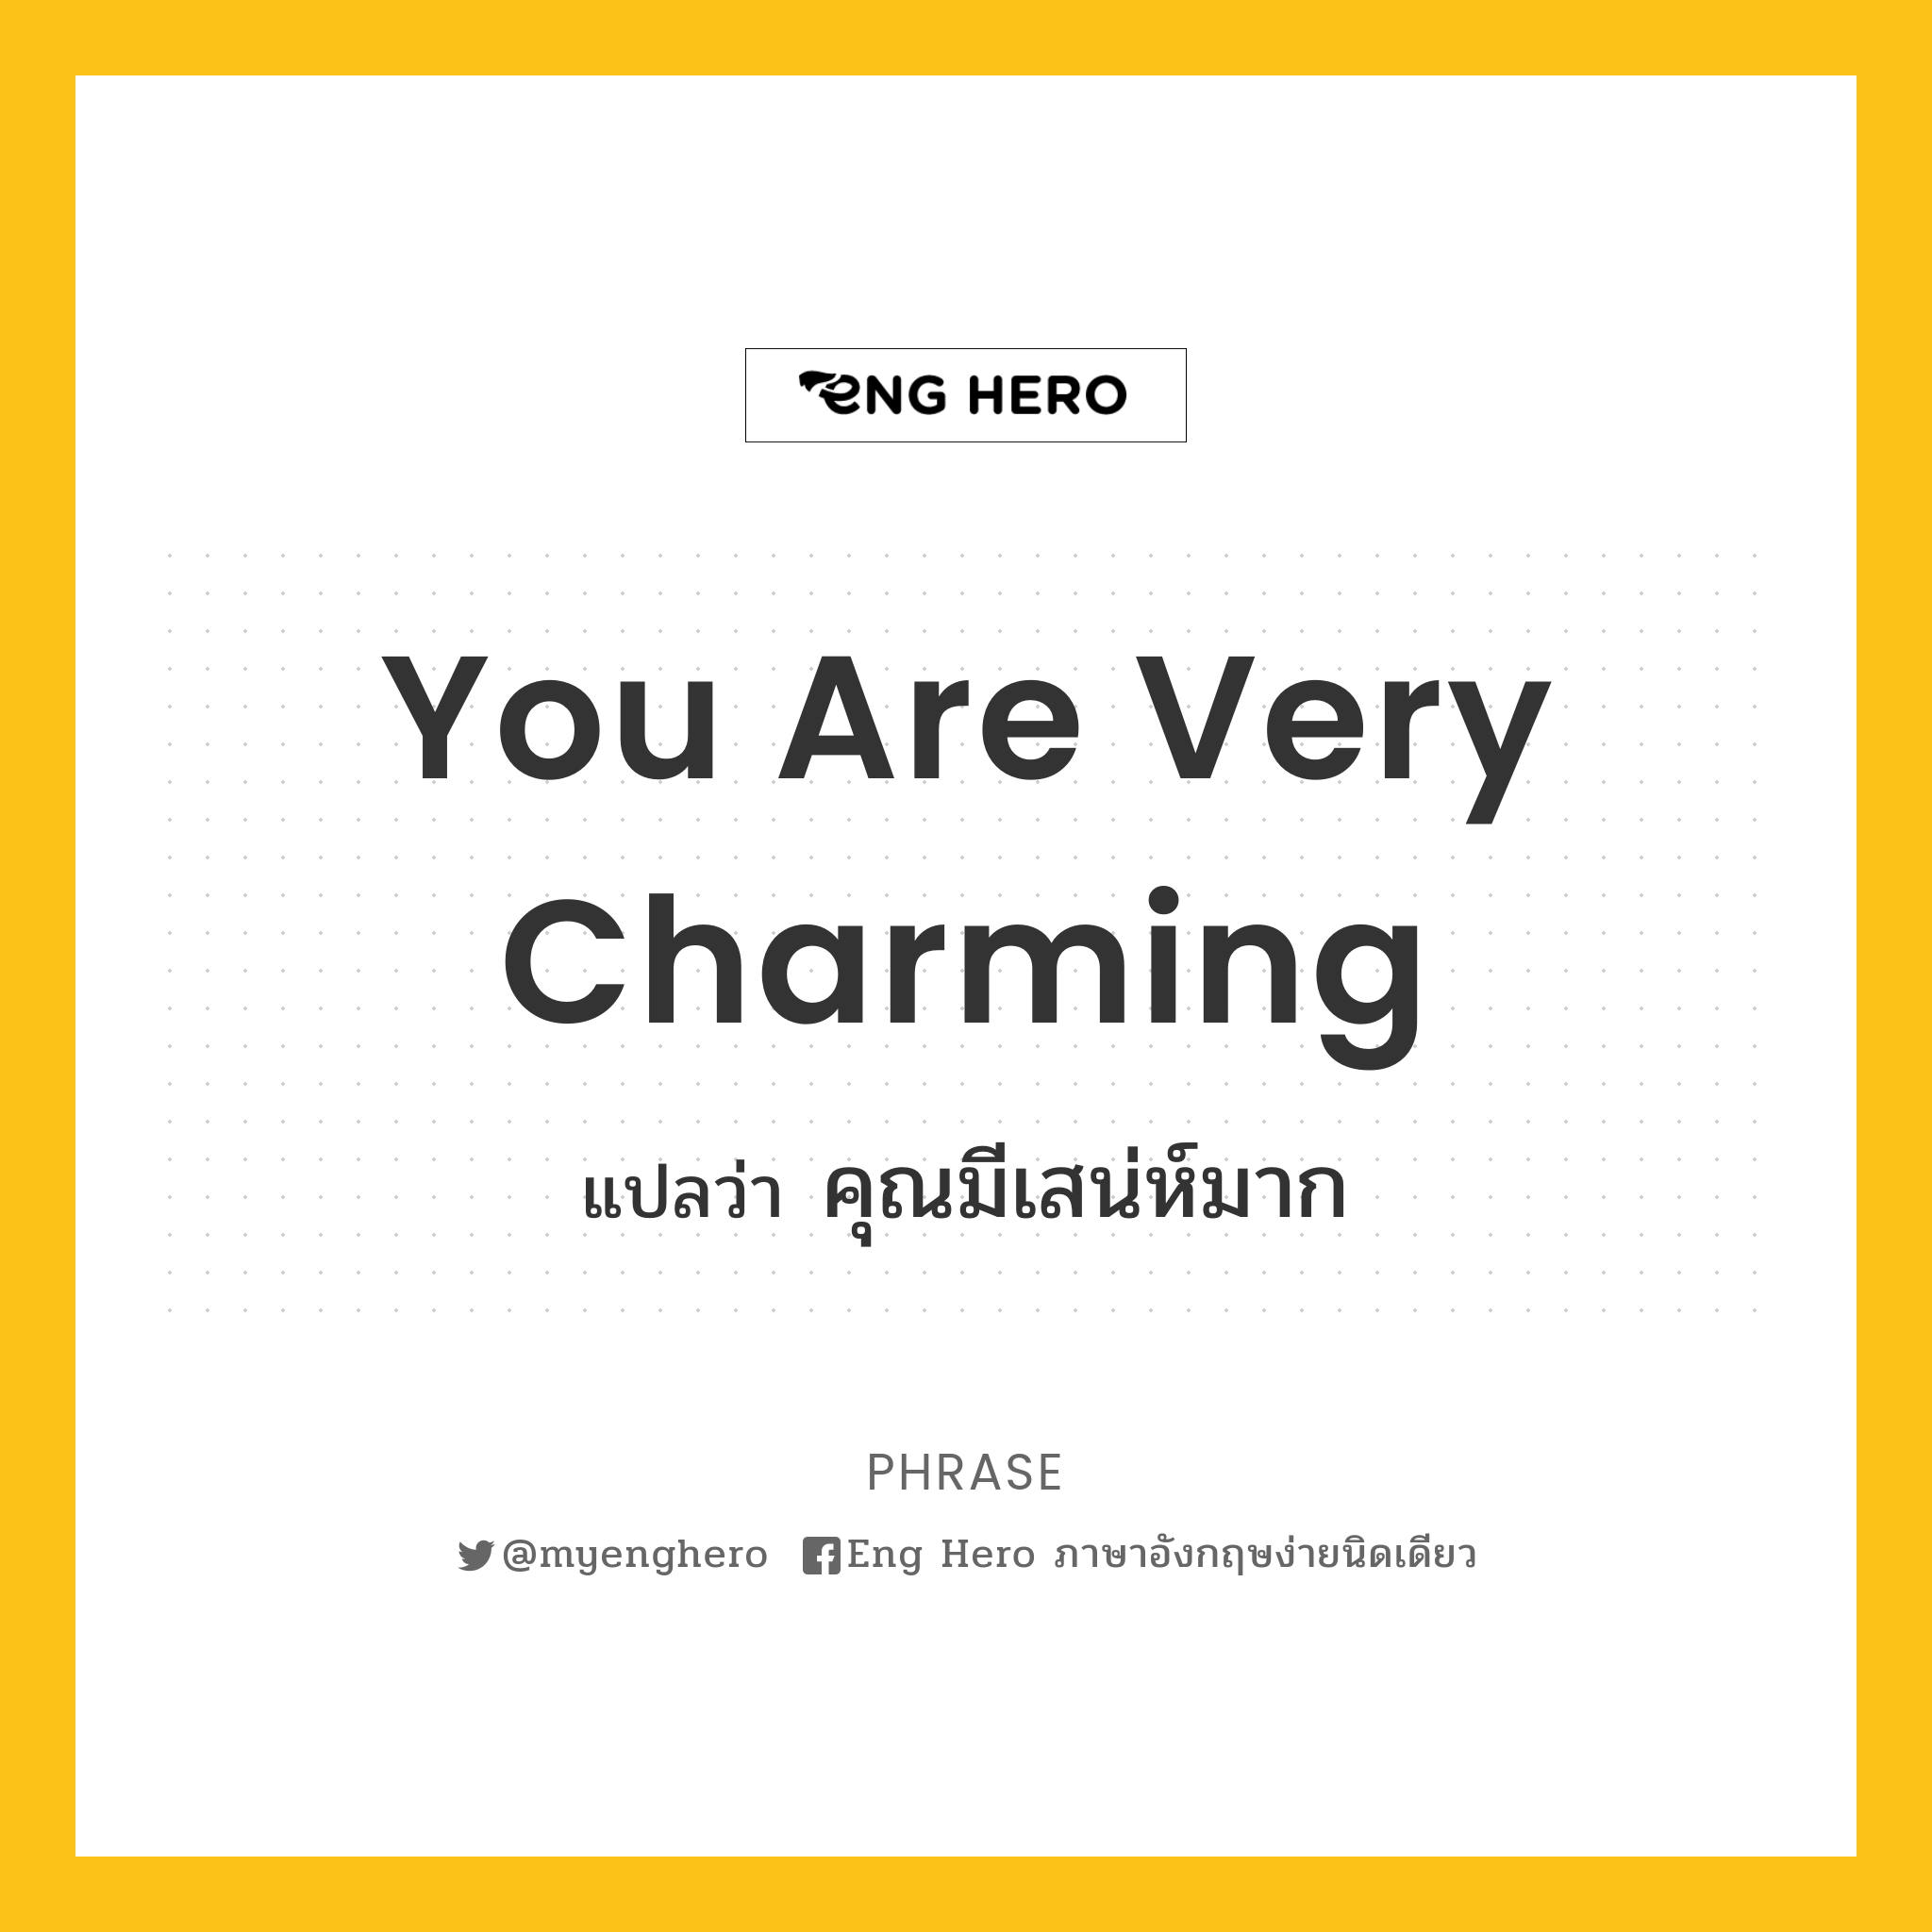 You are very charming